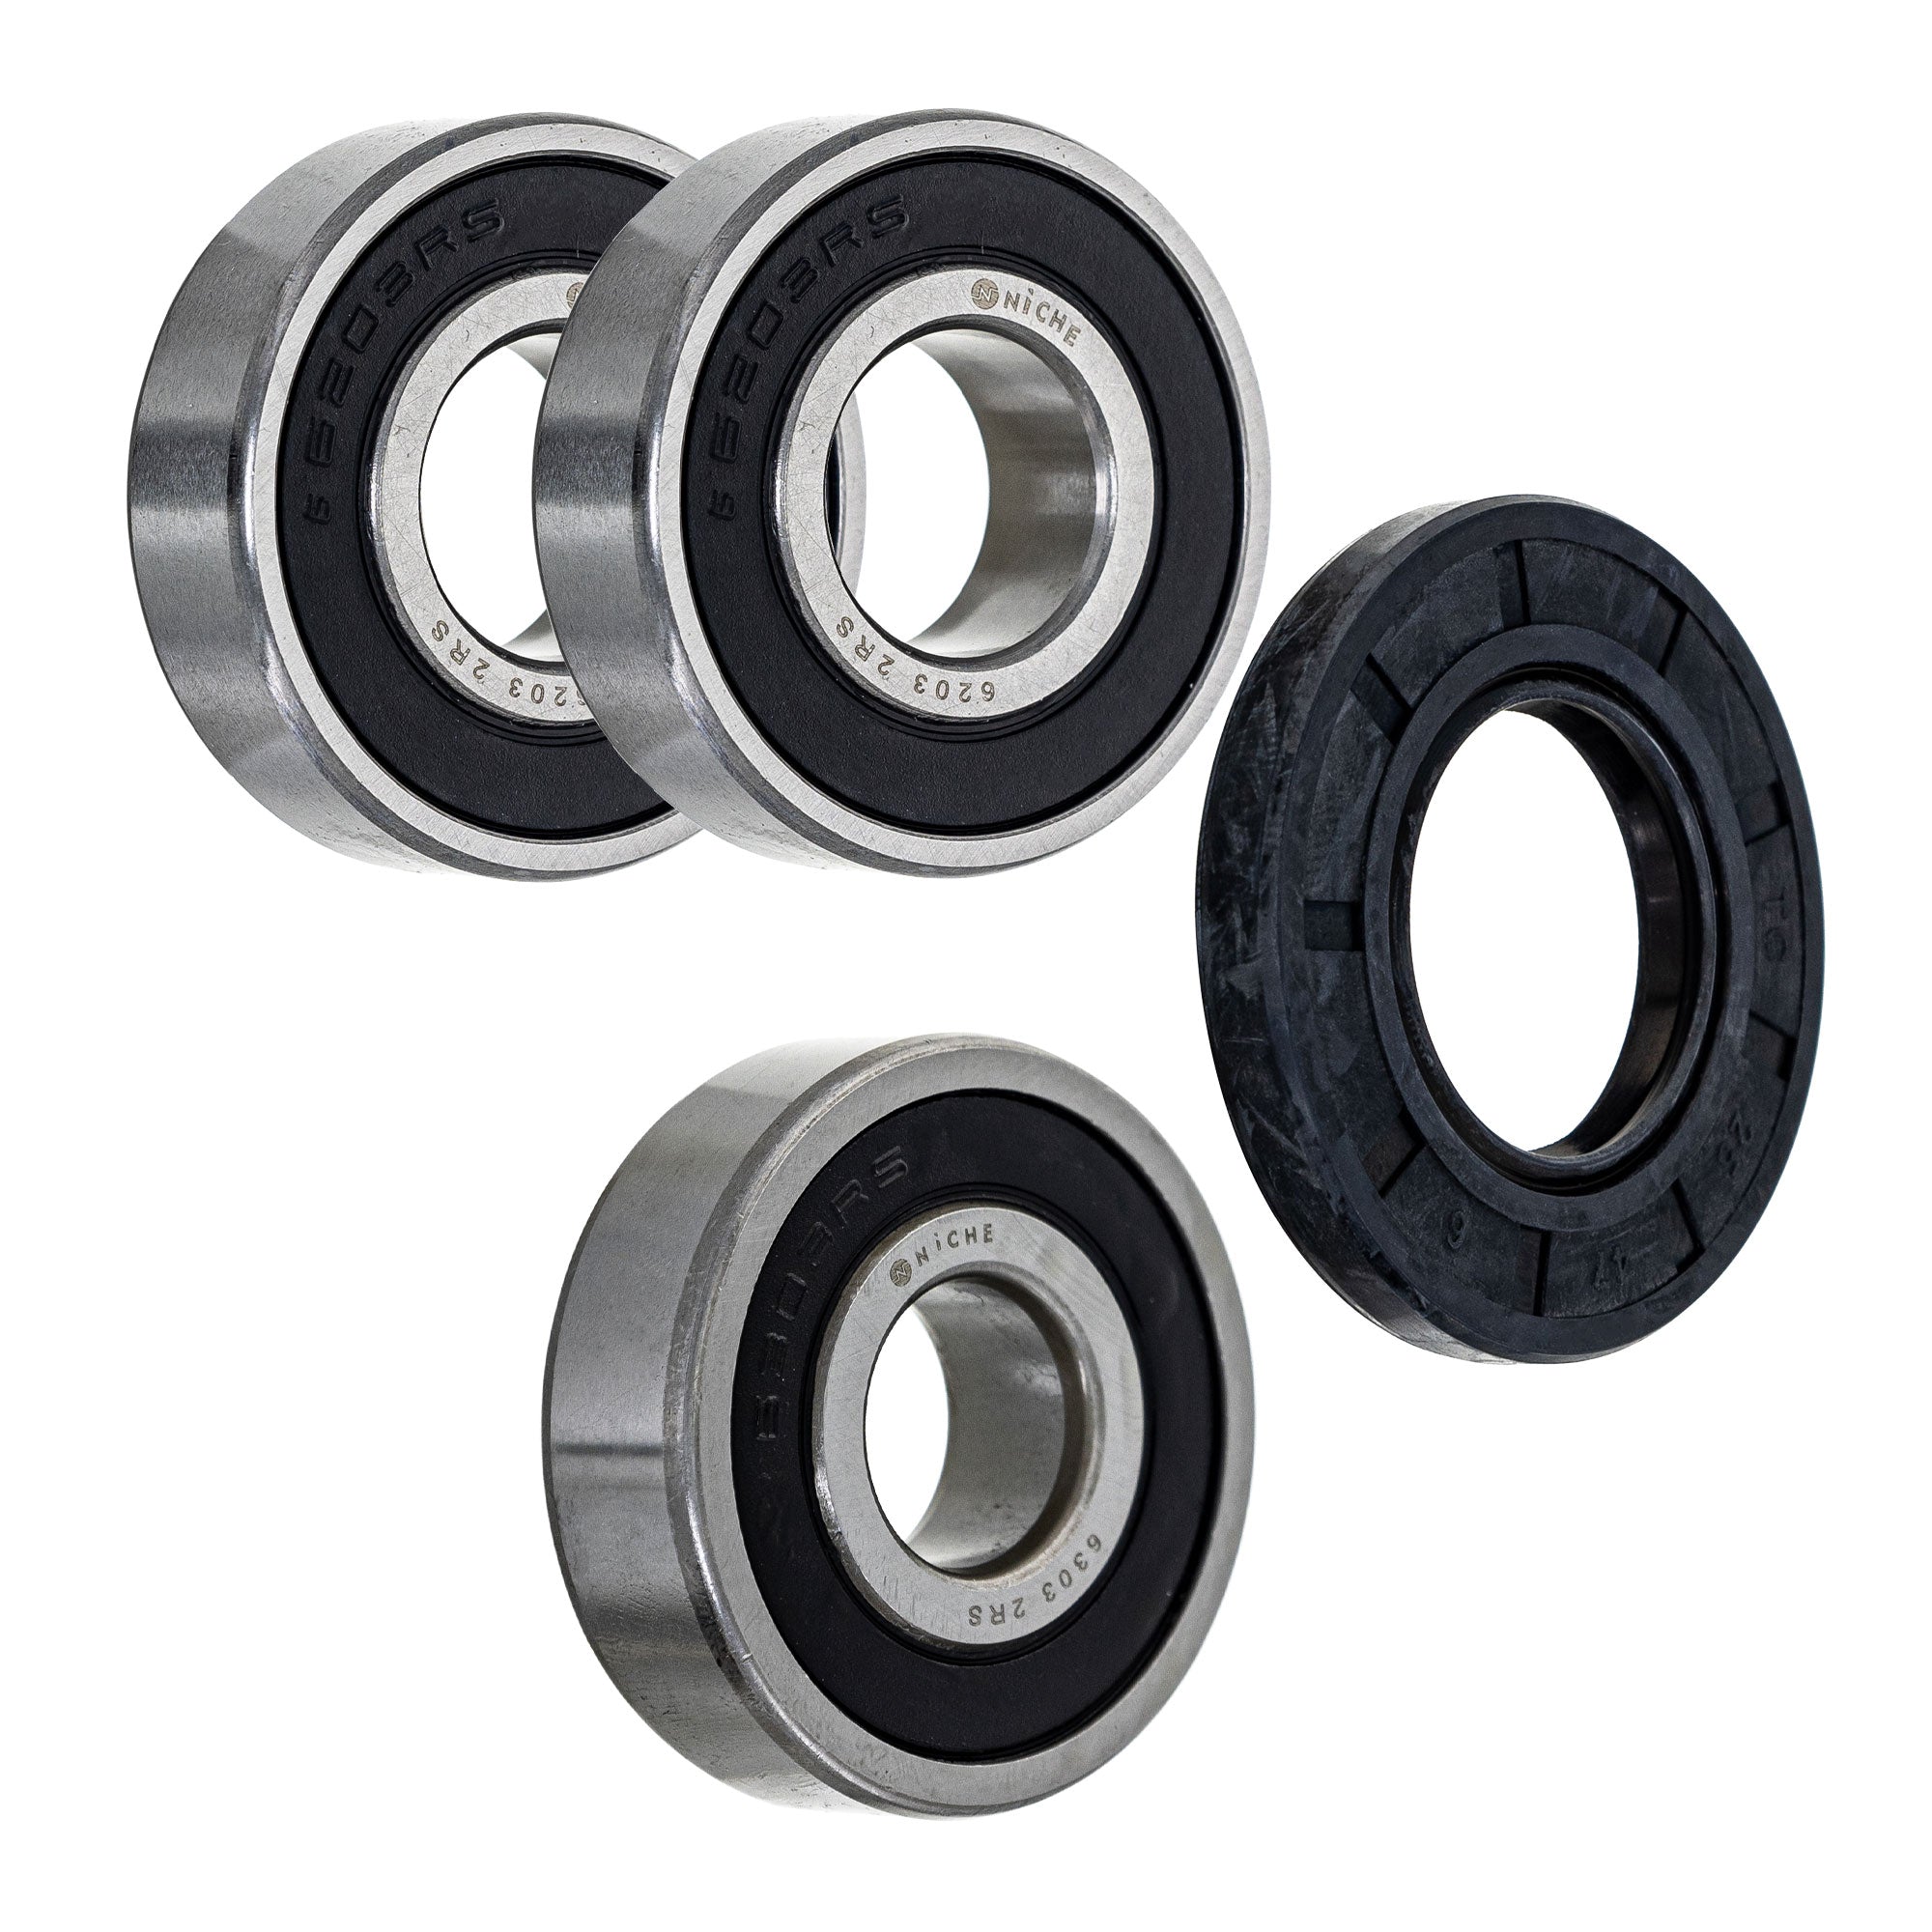 Wheel Bearing Seal Kit for zOTHER Ref No CRF230F CRF150F NICHE MK1008991